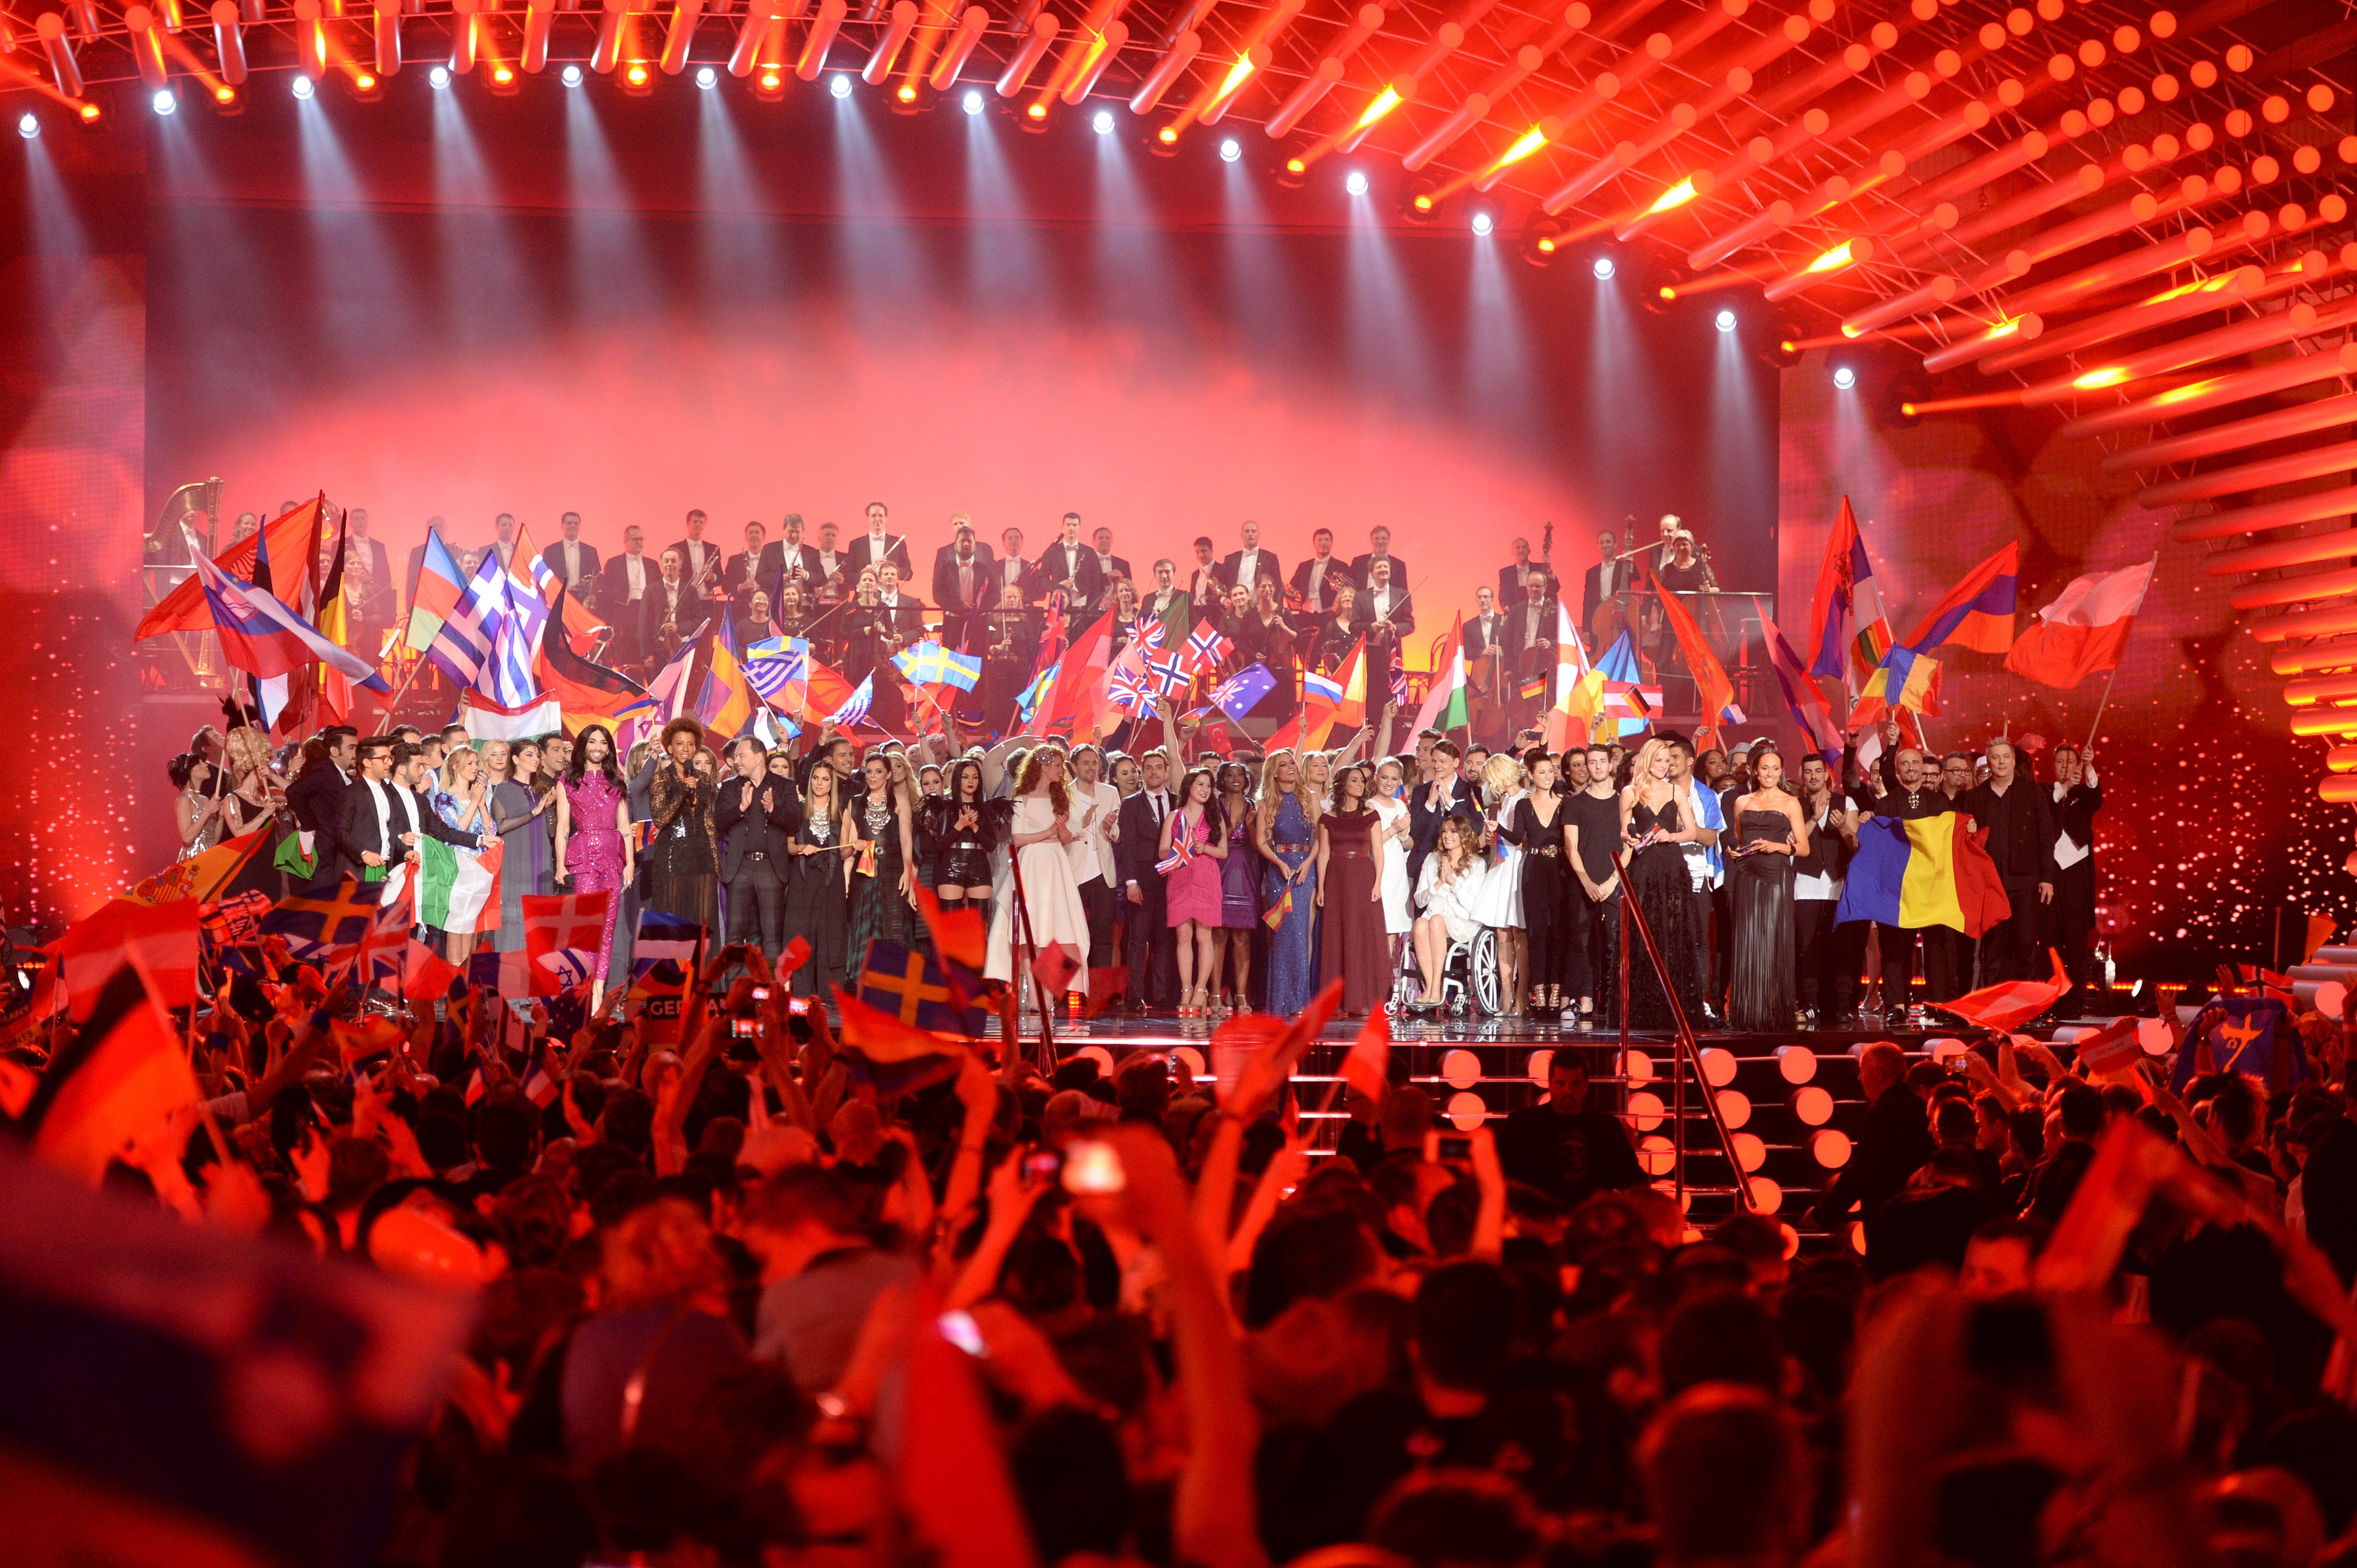 All participants stand on stage during the final of the Eurovision Song Contest 2015 on May 23, 2015 in Vienna, Austria.